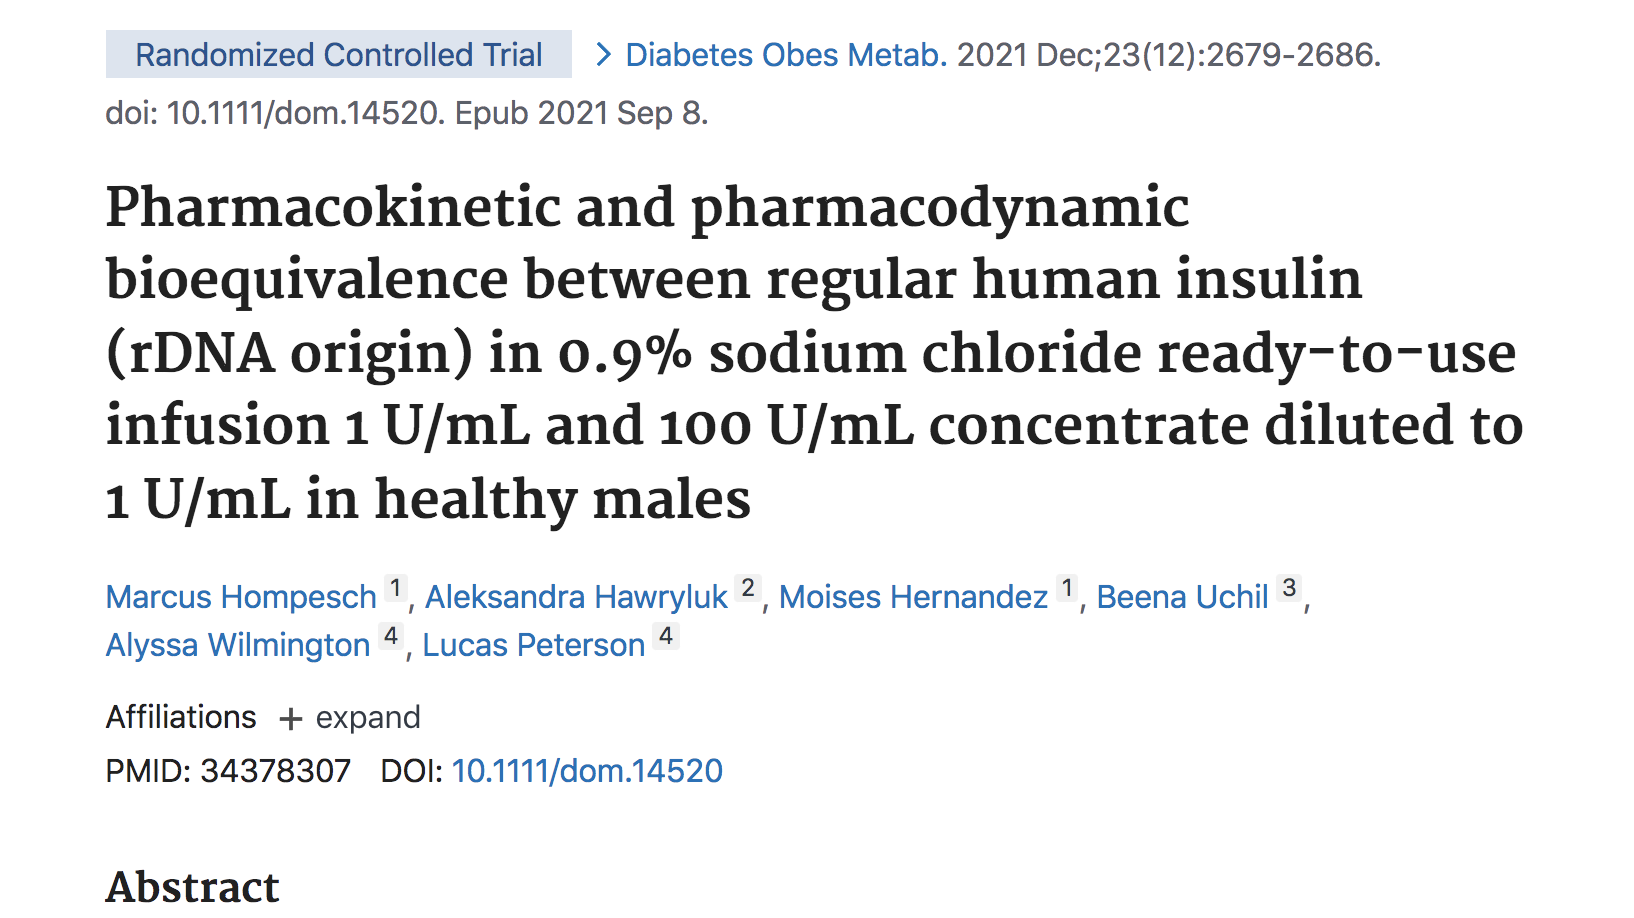 Pharmacokinetic and Pharmacodynamic Bioequivalence between regular human insulin [rDNA origin] in 0.9% sodium chloride ready-to-use infusion 1U/mL and in 100U/mL concentrate diluted to 1U/mL in Healthy Males. thumbnail